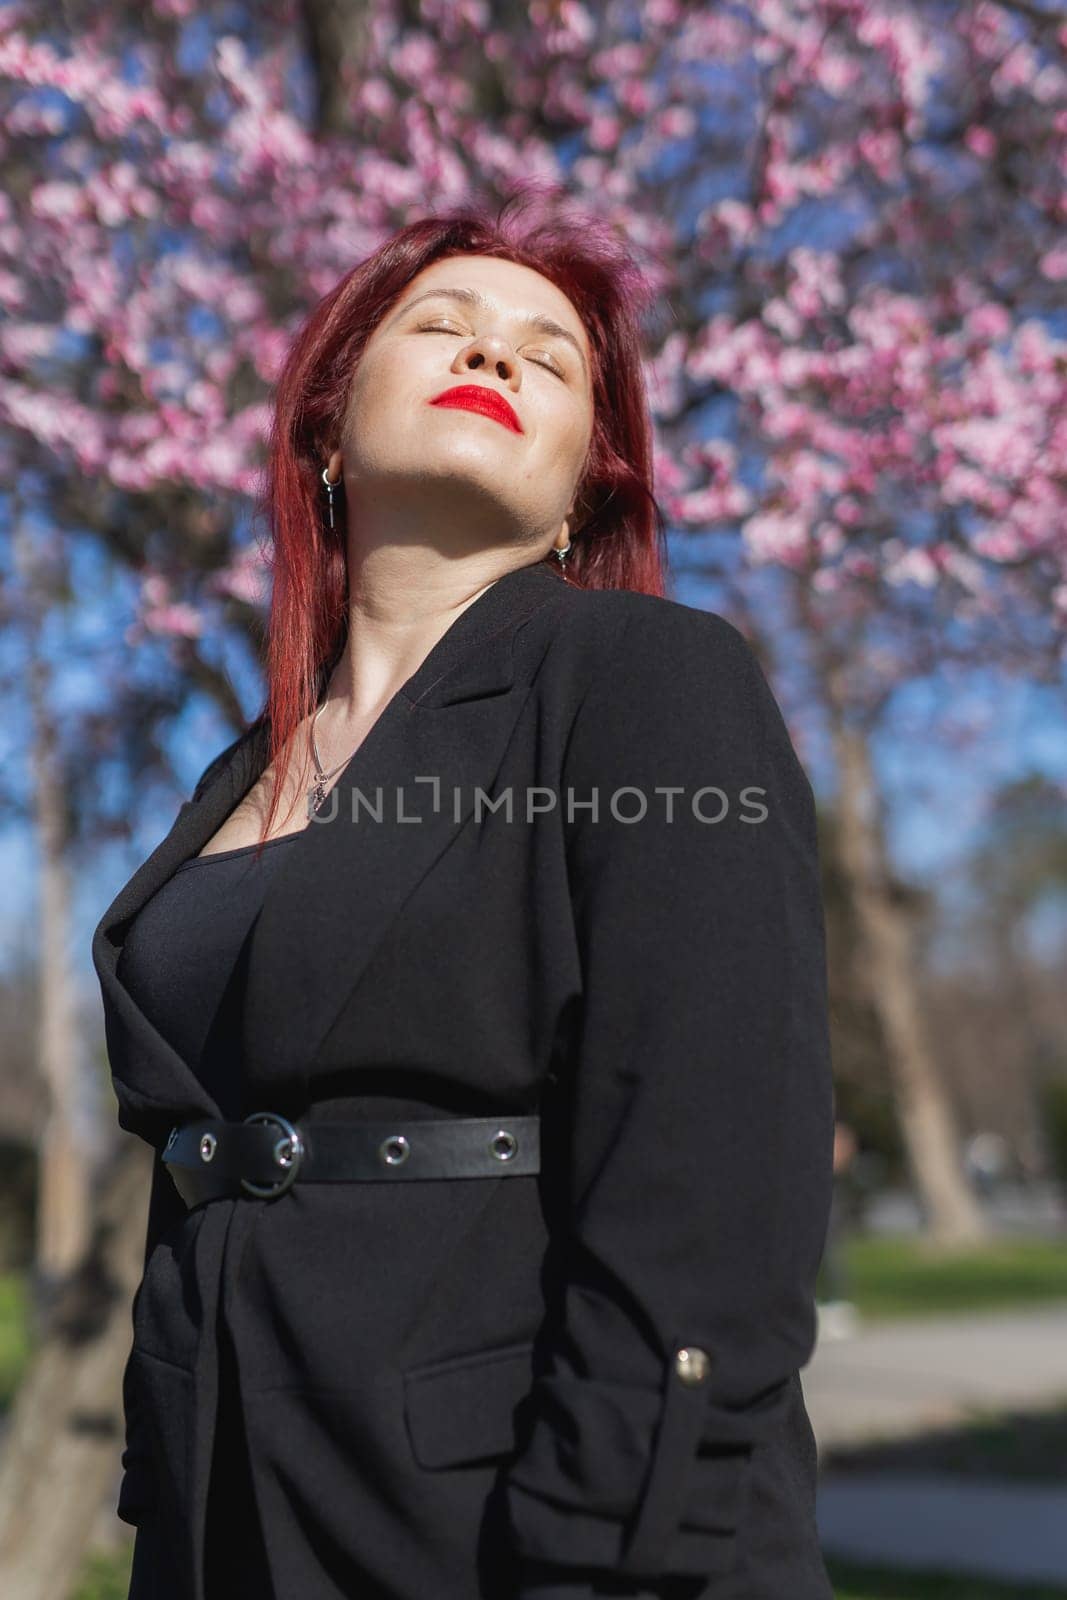 Red haired woman wearing stylish outfit near blossoming sakura in park. Fashionable spring look. Springtime female portrait